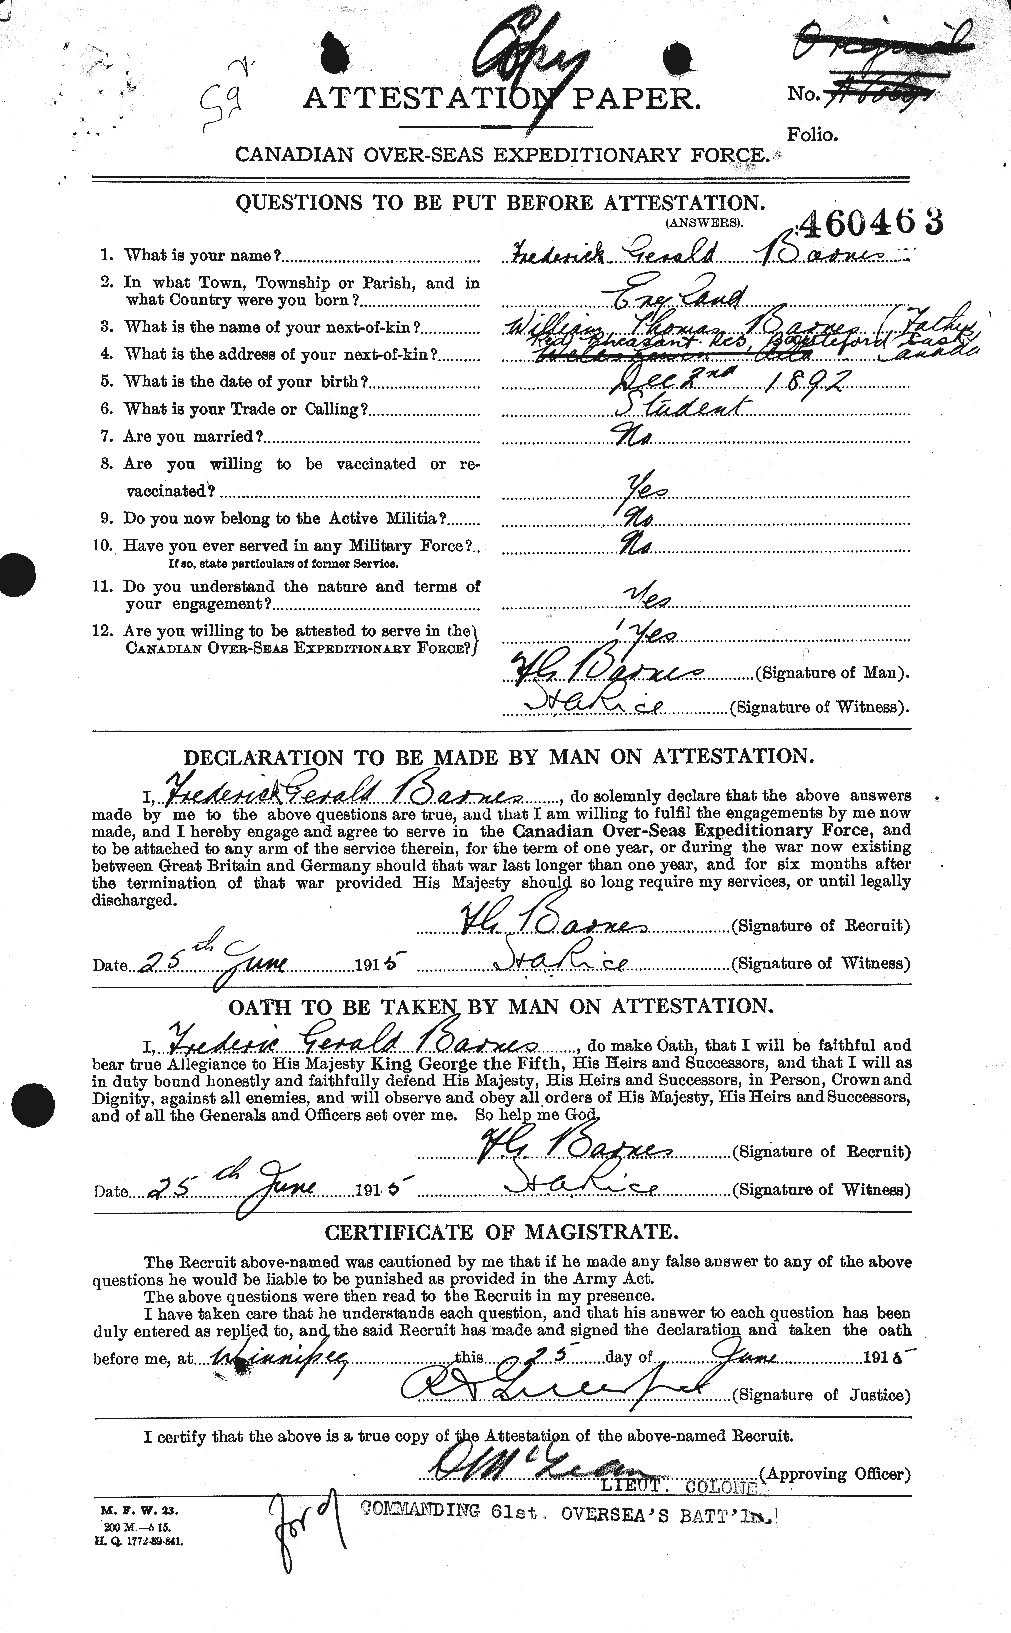 Personnel Records of the First World War - CEF 222532a